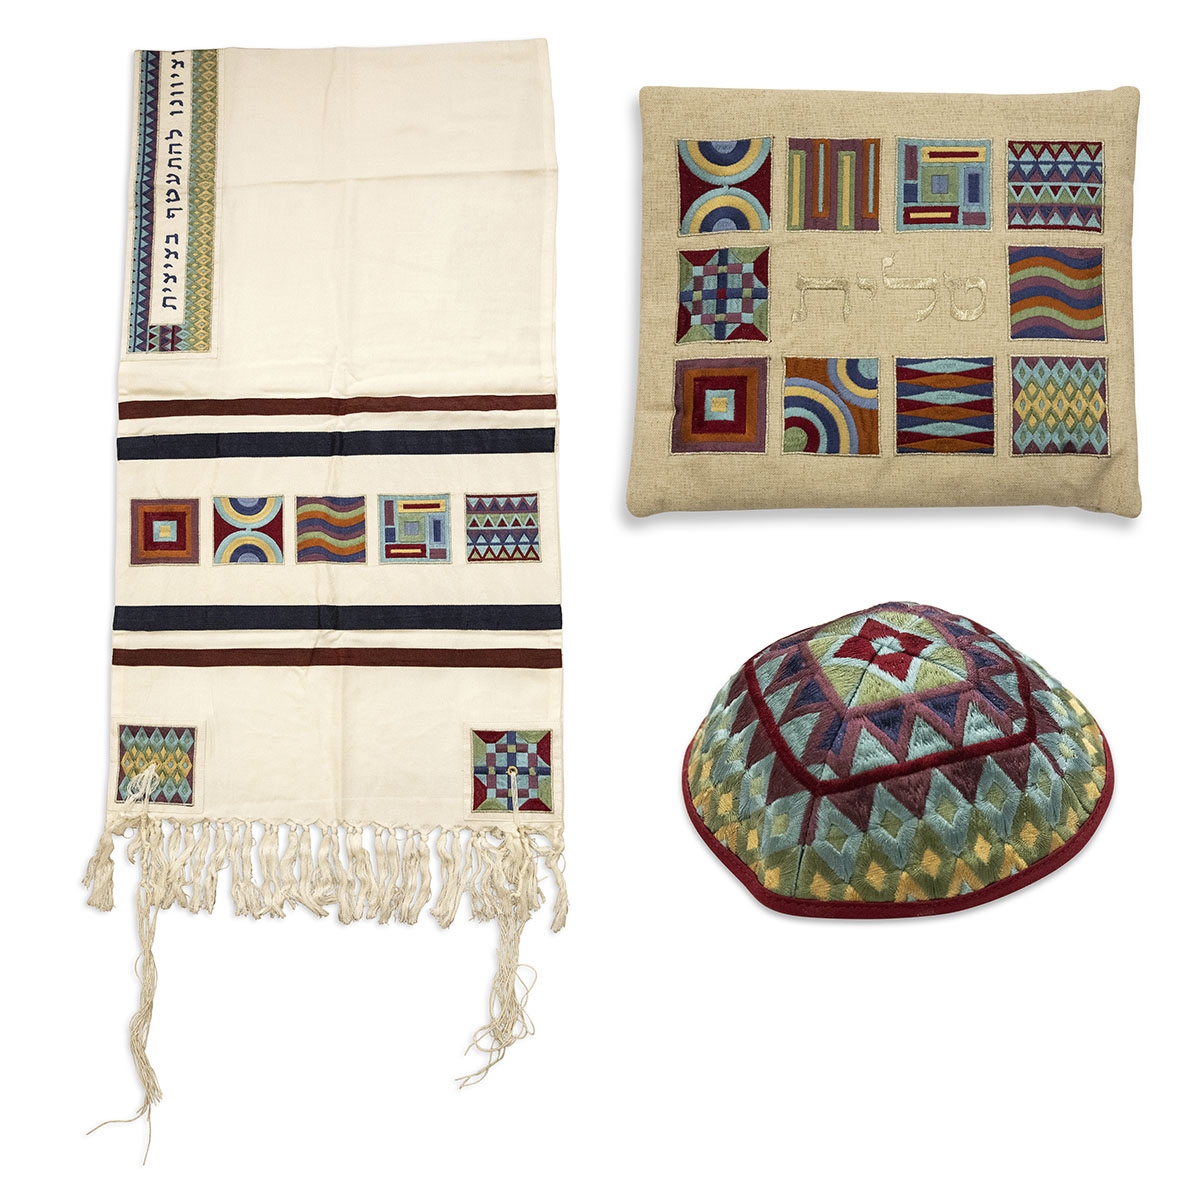 Yair Emanuel Embroidered Prayer Shawl (Tallit) Set With Multicolored Square Patterns - 1